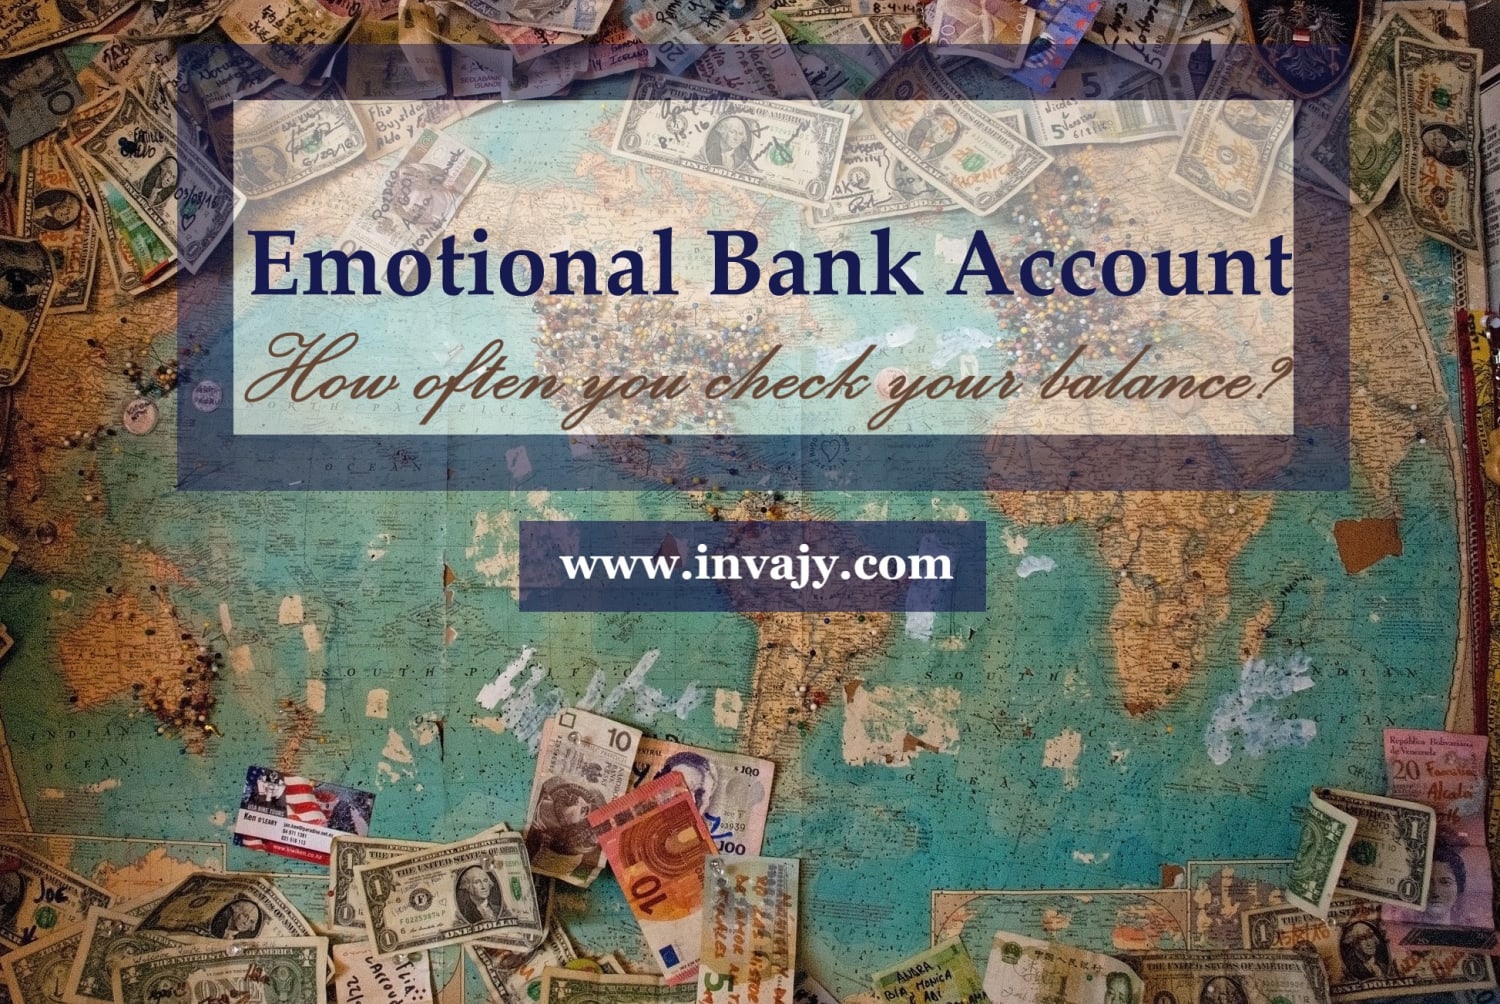 Emotional Bank Account : How often you check your balance?